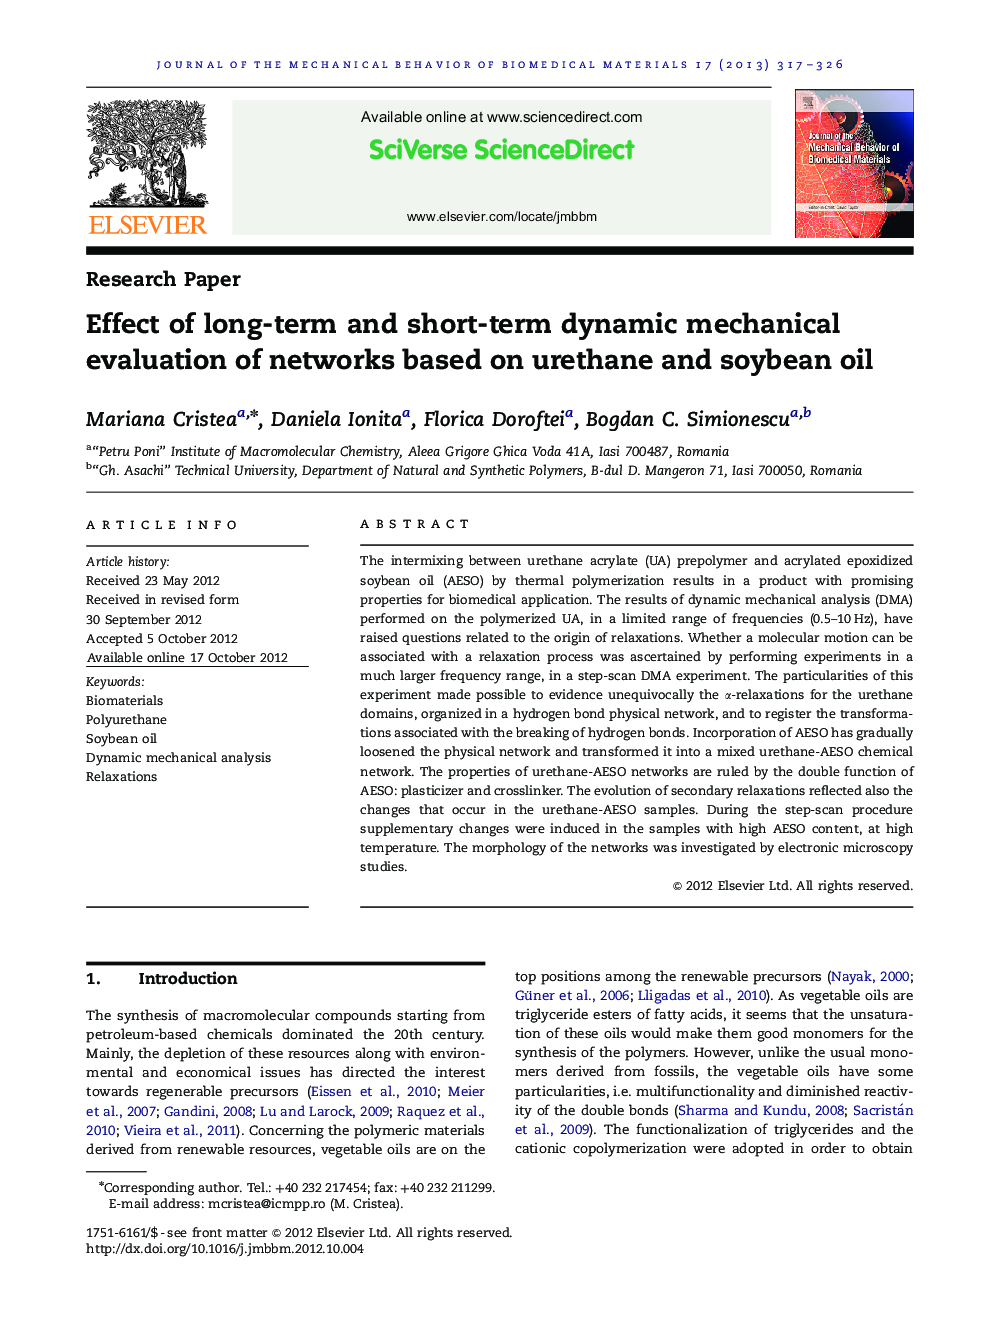 Effect of long-term and short-term dynamic mechanical evaluation of networks based on urethane and soybean oil